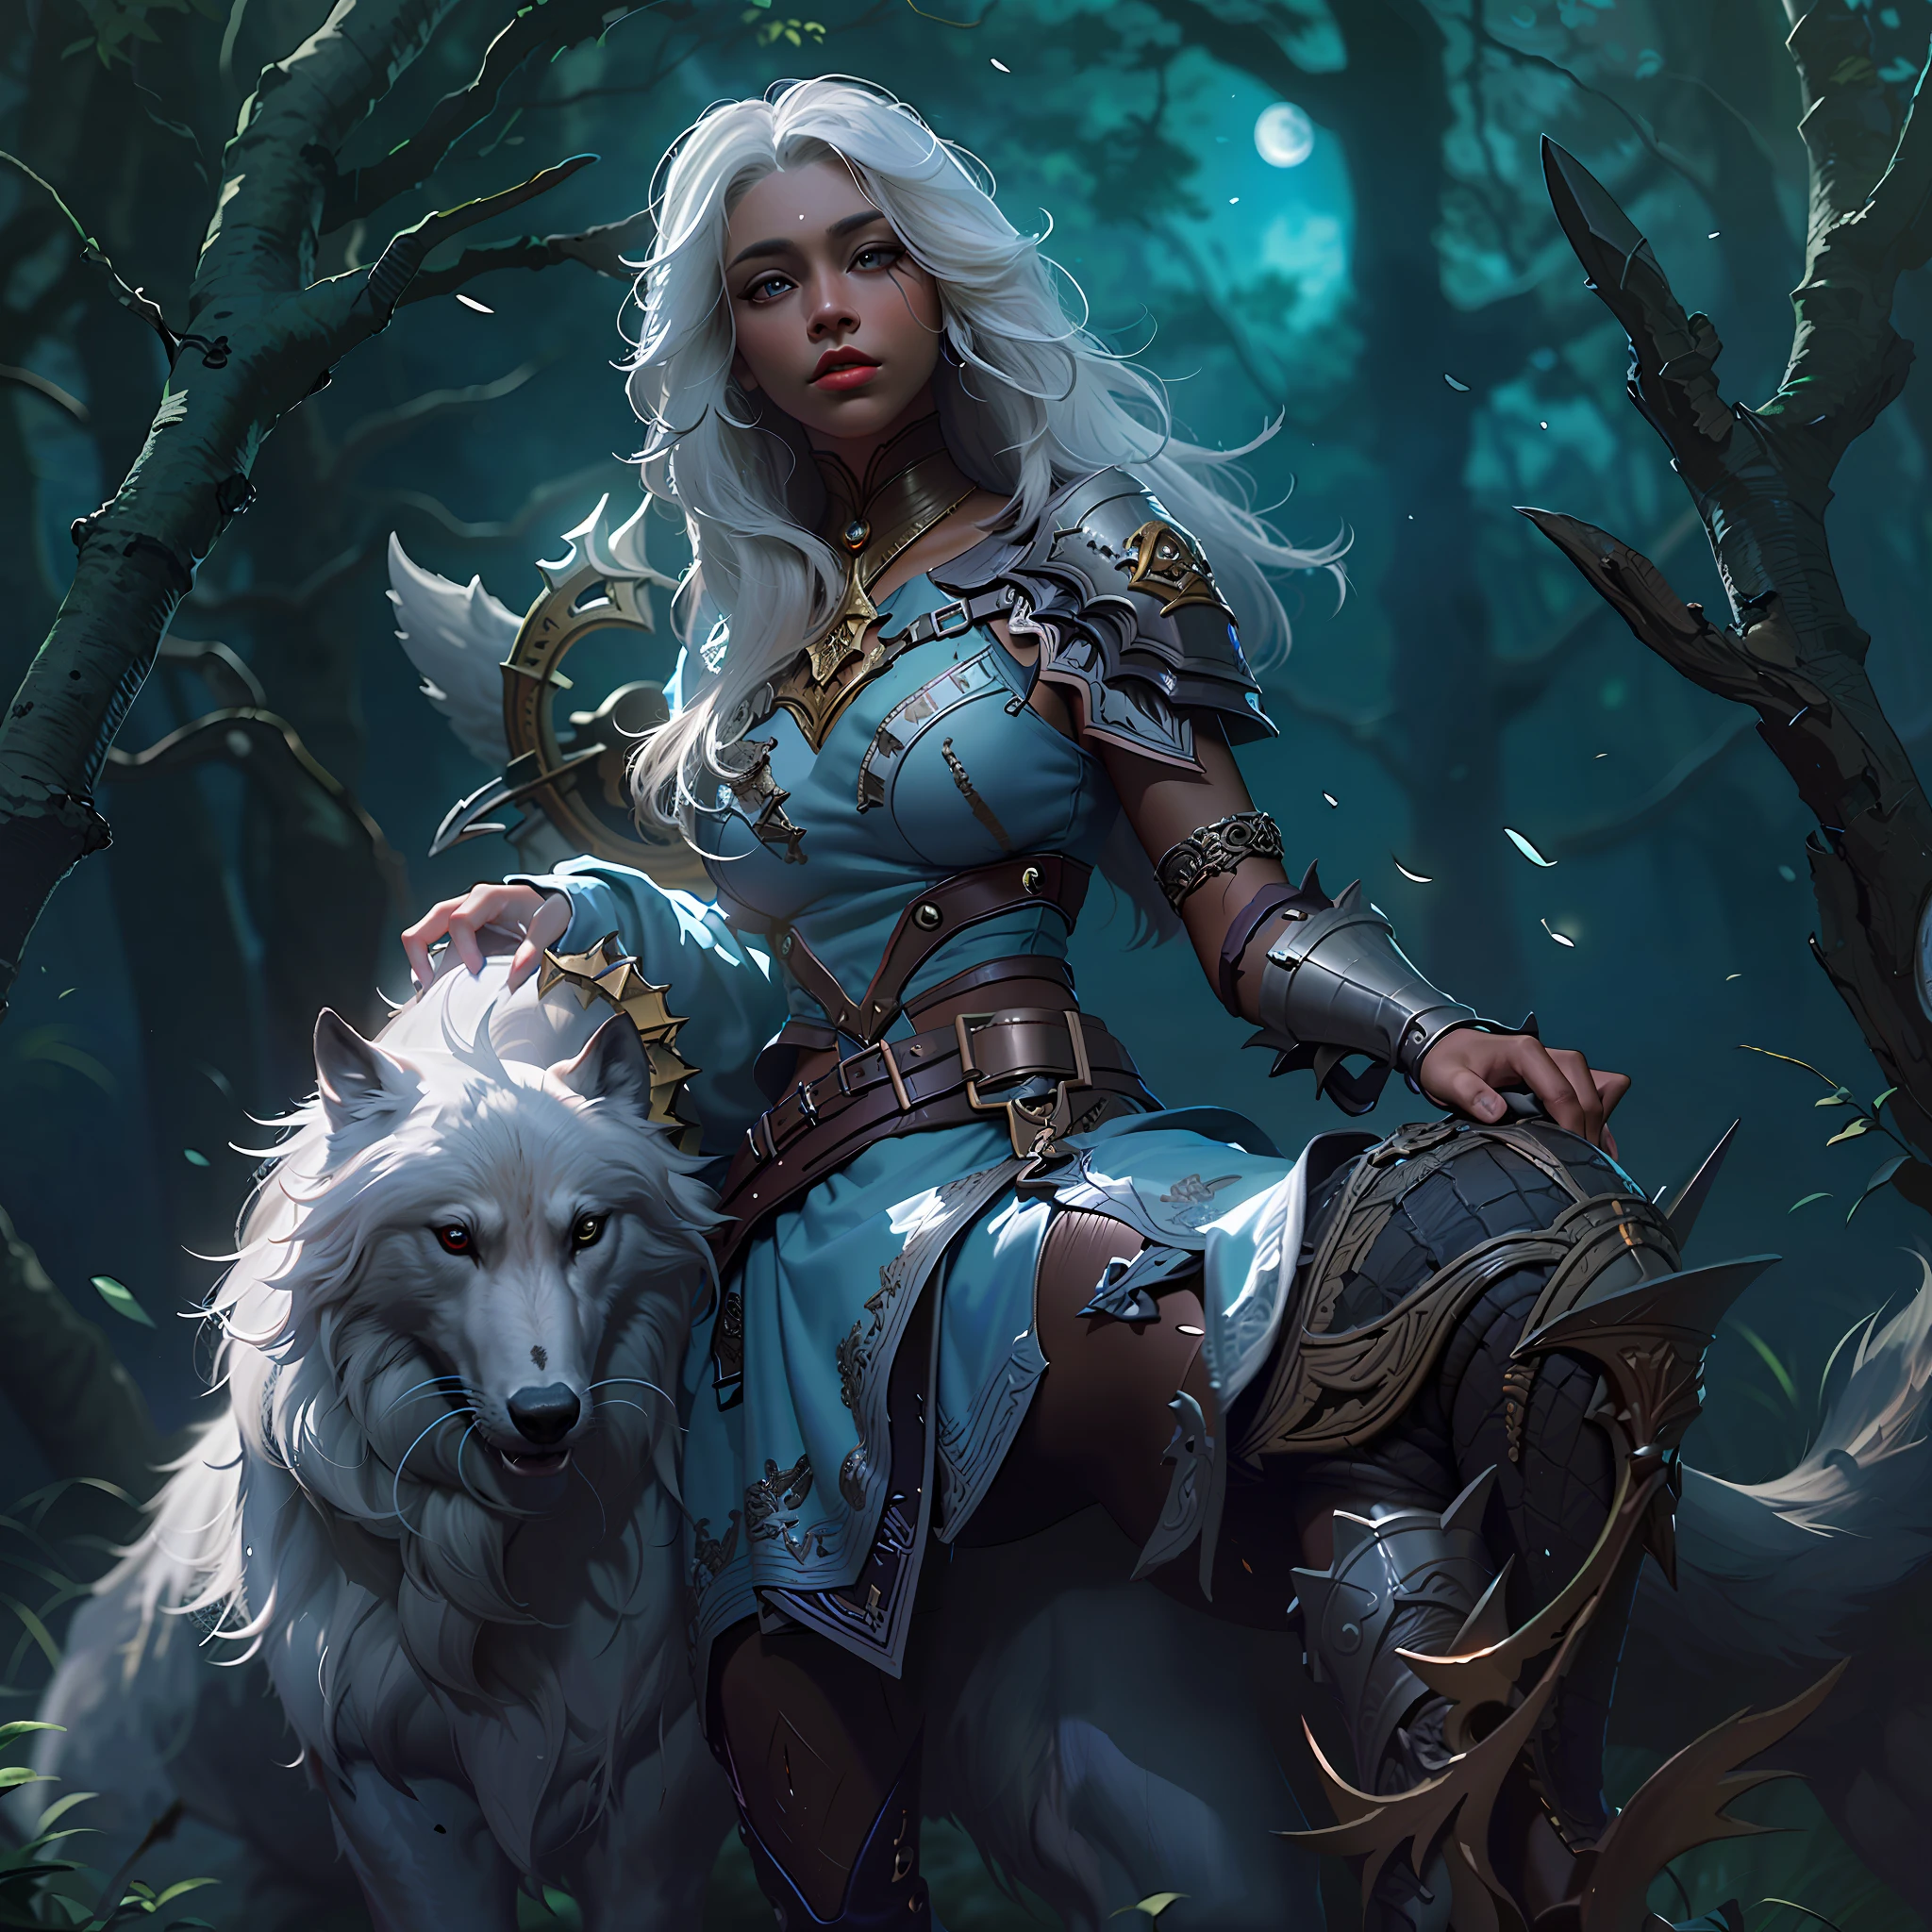 high details, best quality, 8k, [ultra detailed], masterpiece, best quality, (extremely detailed), dynamic angle, ultra wide shot, RAW, photorealistic, fantasy art, dnd art, rpg art, realistic art, a wide angle picture of an epic female drow ranger and her pet wolf,  warrior of nature, fighter of nature, full body, [[anatomically correct]] full body (1.5 intricate details, Masterpiece, best quality) talking to am epic wolf (1.6 intricate details, Masterpiece, best quality) armed with an epic magical sword  (1.5 intricate details, Masterpiece, best quality) epic magical sword, glowing in blue light. in dark forest (1.5 intricate details, Masterpiece, best quality), a female beautiful epic drow wearing leather armor (1.4 intricate details, Masterpiece, best quality), leather boots, thick hair, long hair, white hair, black skin intense eyes, forest  background (intense details), moon light, stars light, clouds (1.4 intricate details, Masterpiece, best quality), dynamic angle, (1.4 intricate details, Masterpiece, best quality) 3D rendering, high details, best quality, highres, ultra wide angle